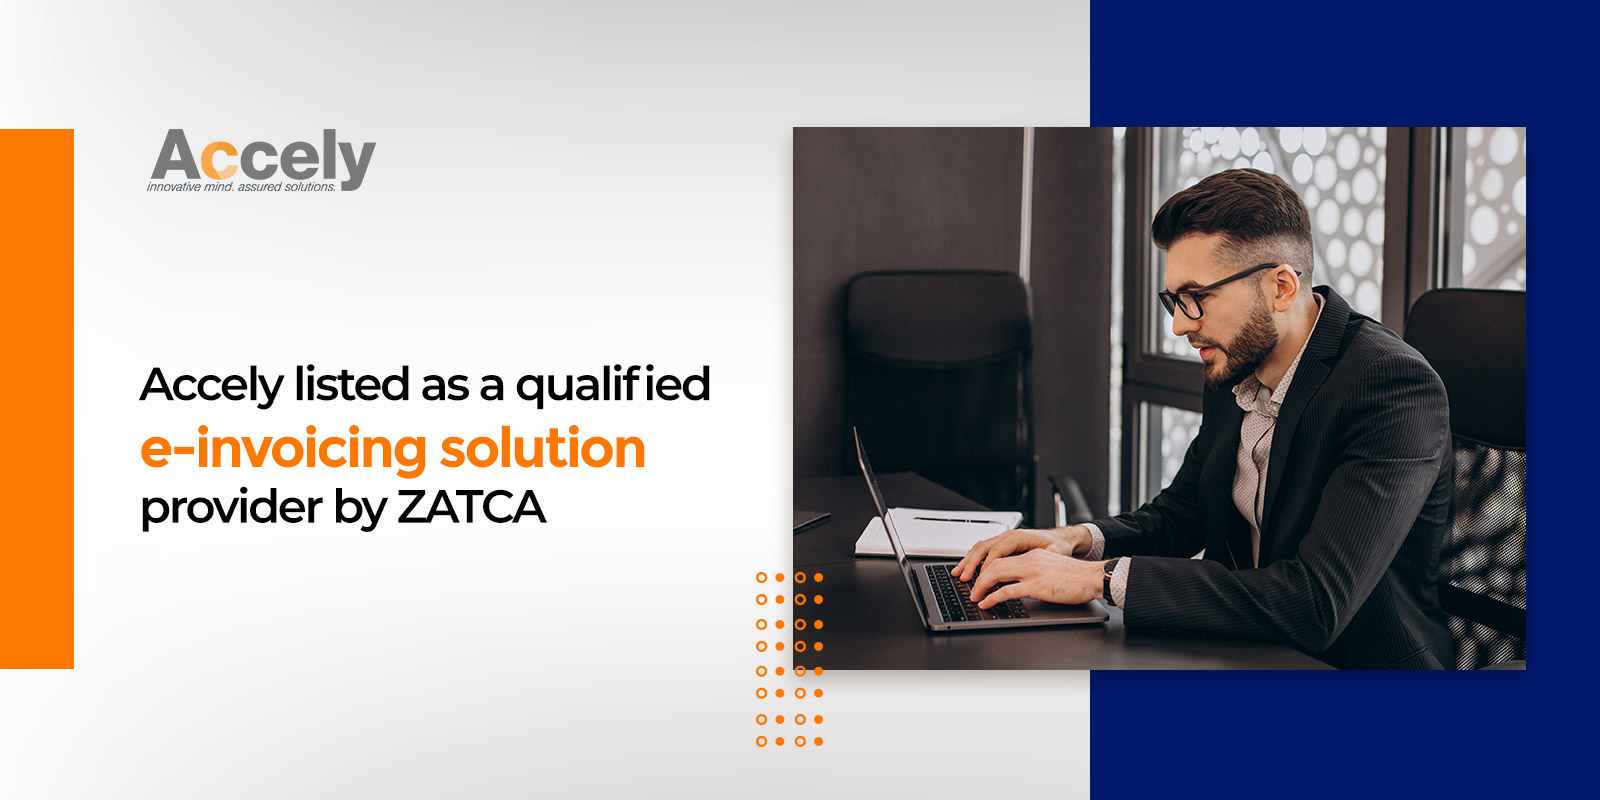 Accely listed as a qualified e-invoicing solution provider by ZATCA